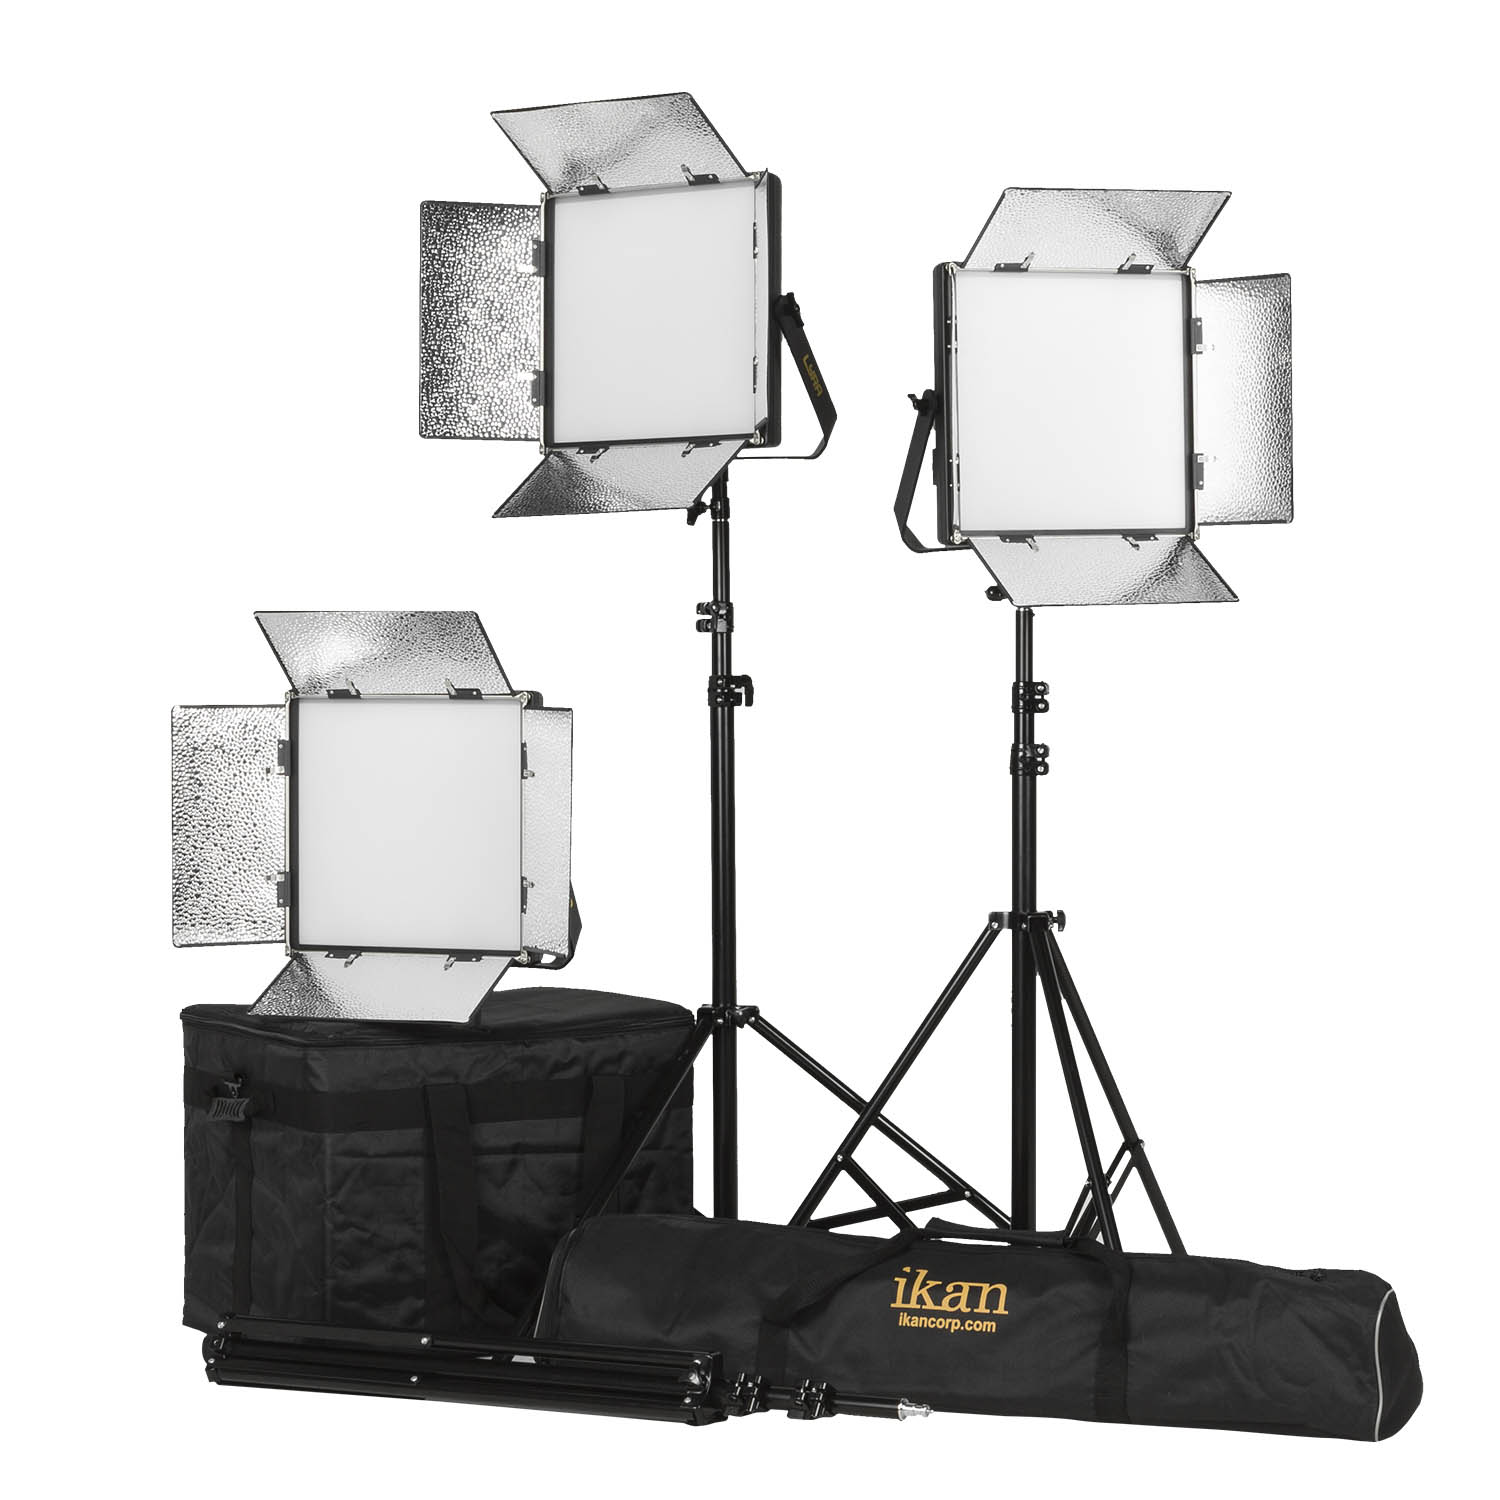 Mylo Bi-Color 5-Point LED Light Kit w/ 5 x MB8, Includes DV Batteries,  Stands, and Bags - Ikan